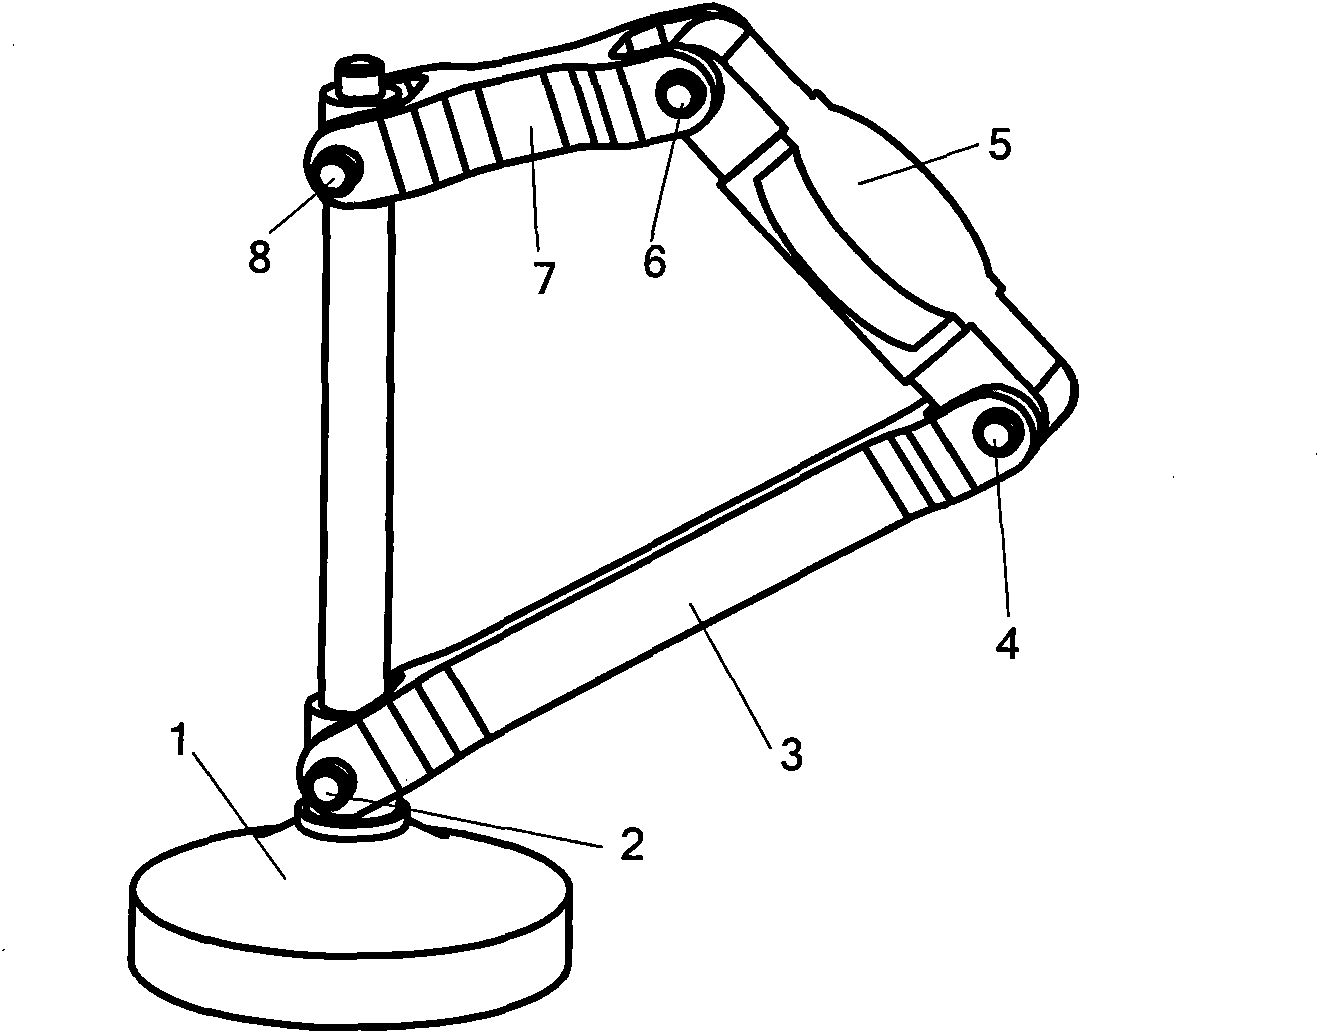 Motion decoupling two-degree-of-freedom rotation parallel mechanism